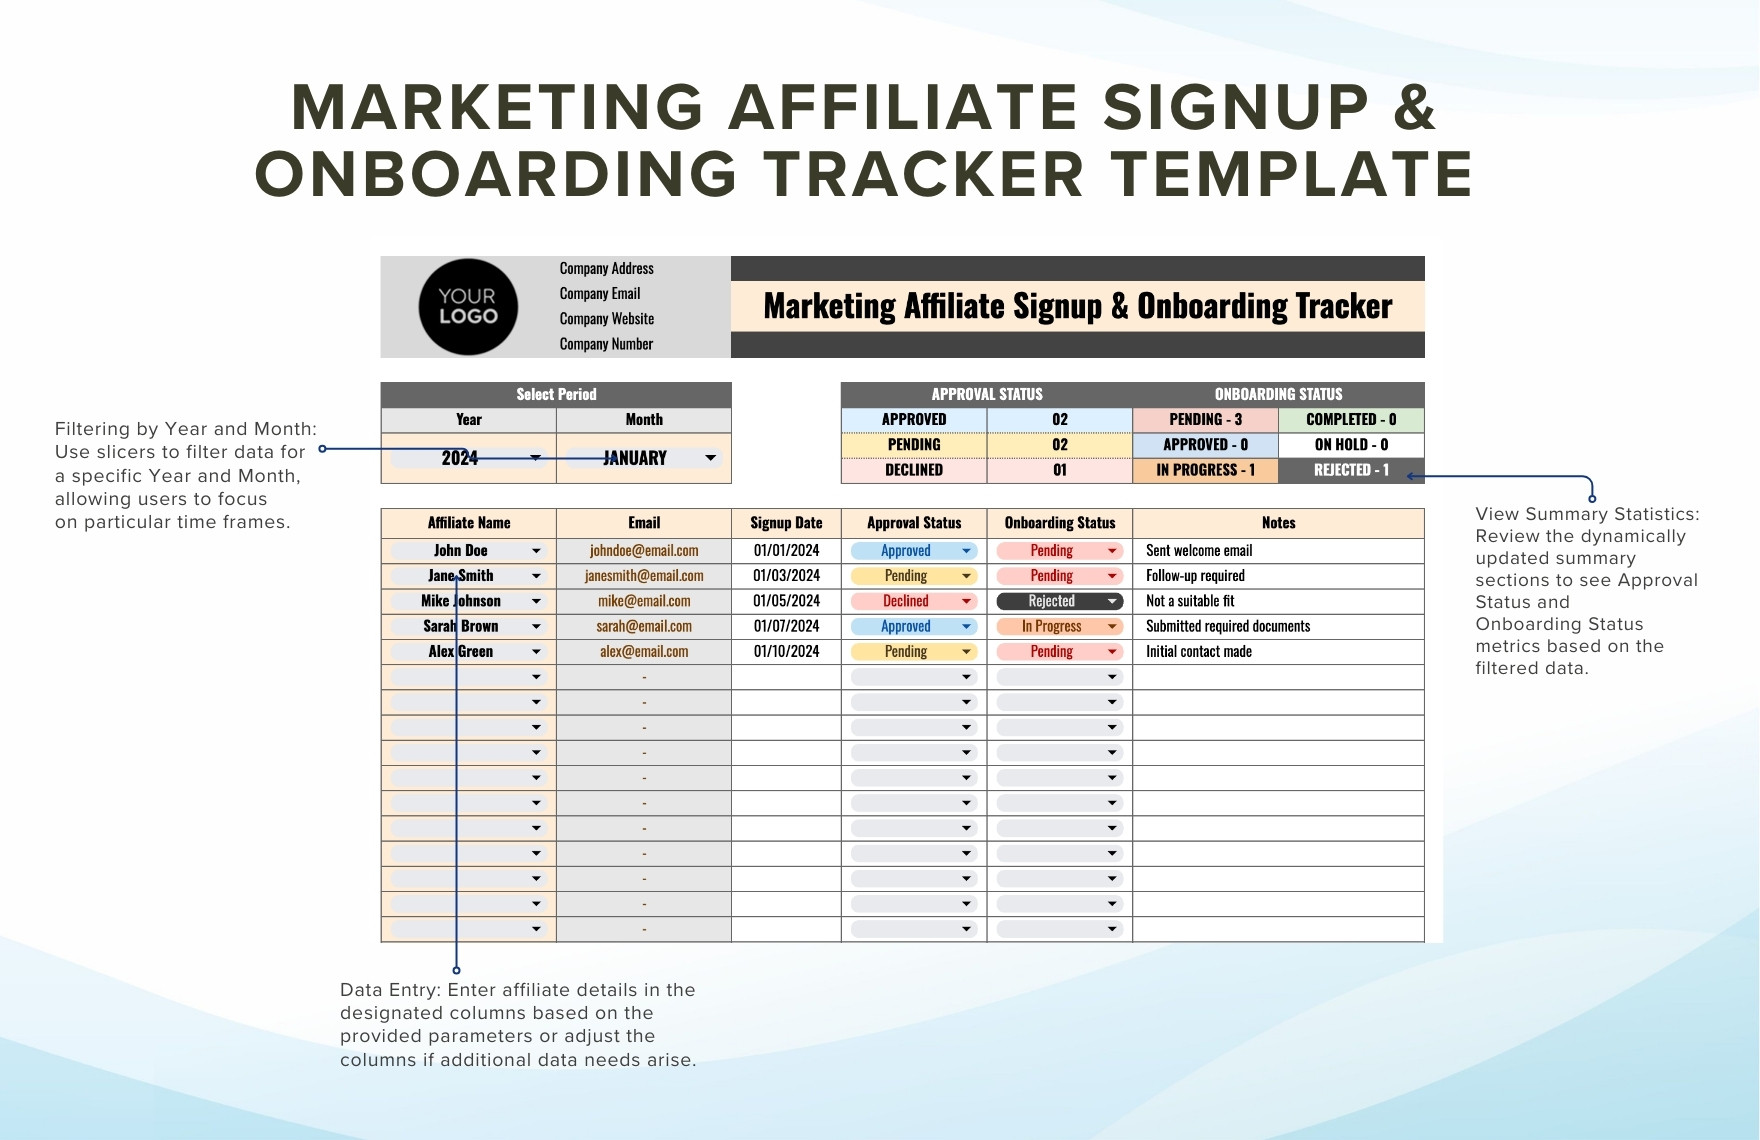 Marketing Affiliate Signup & Onboarding Tracker Template